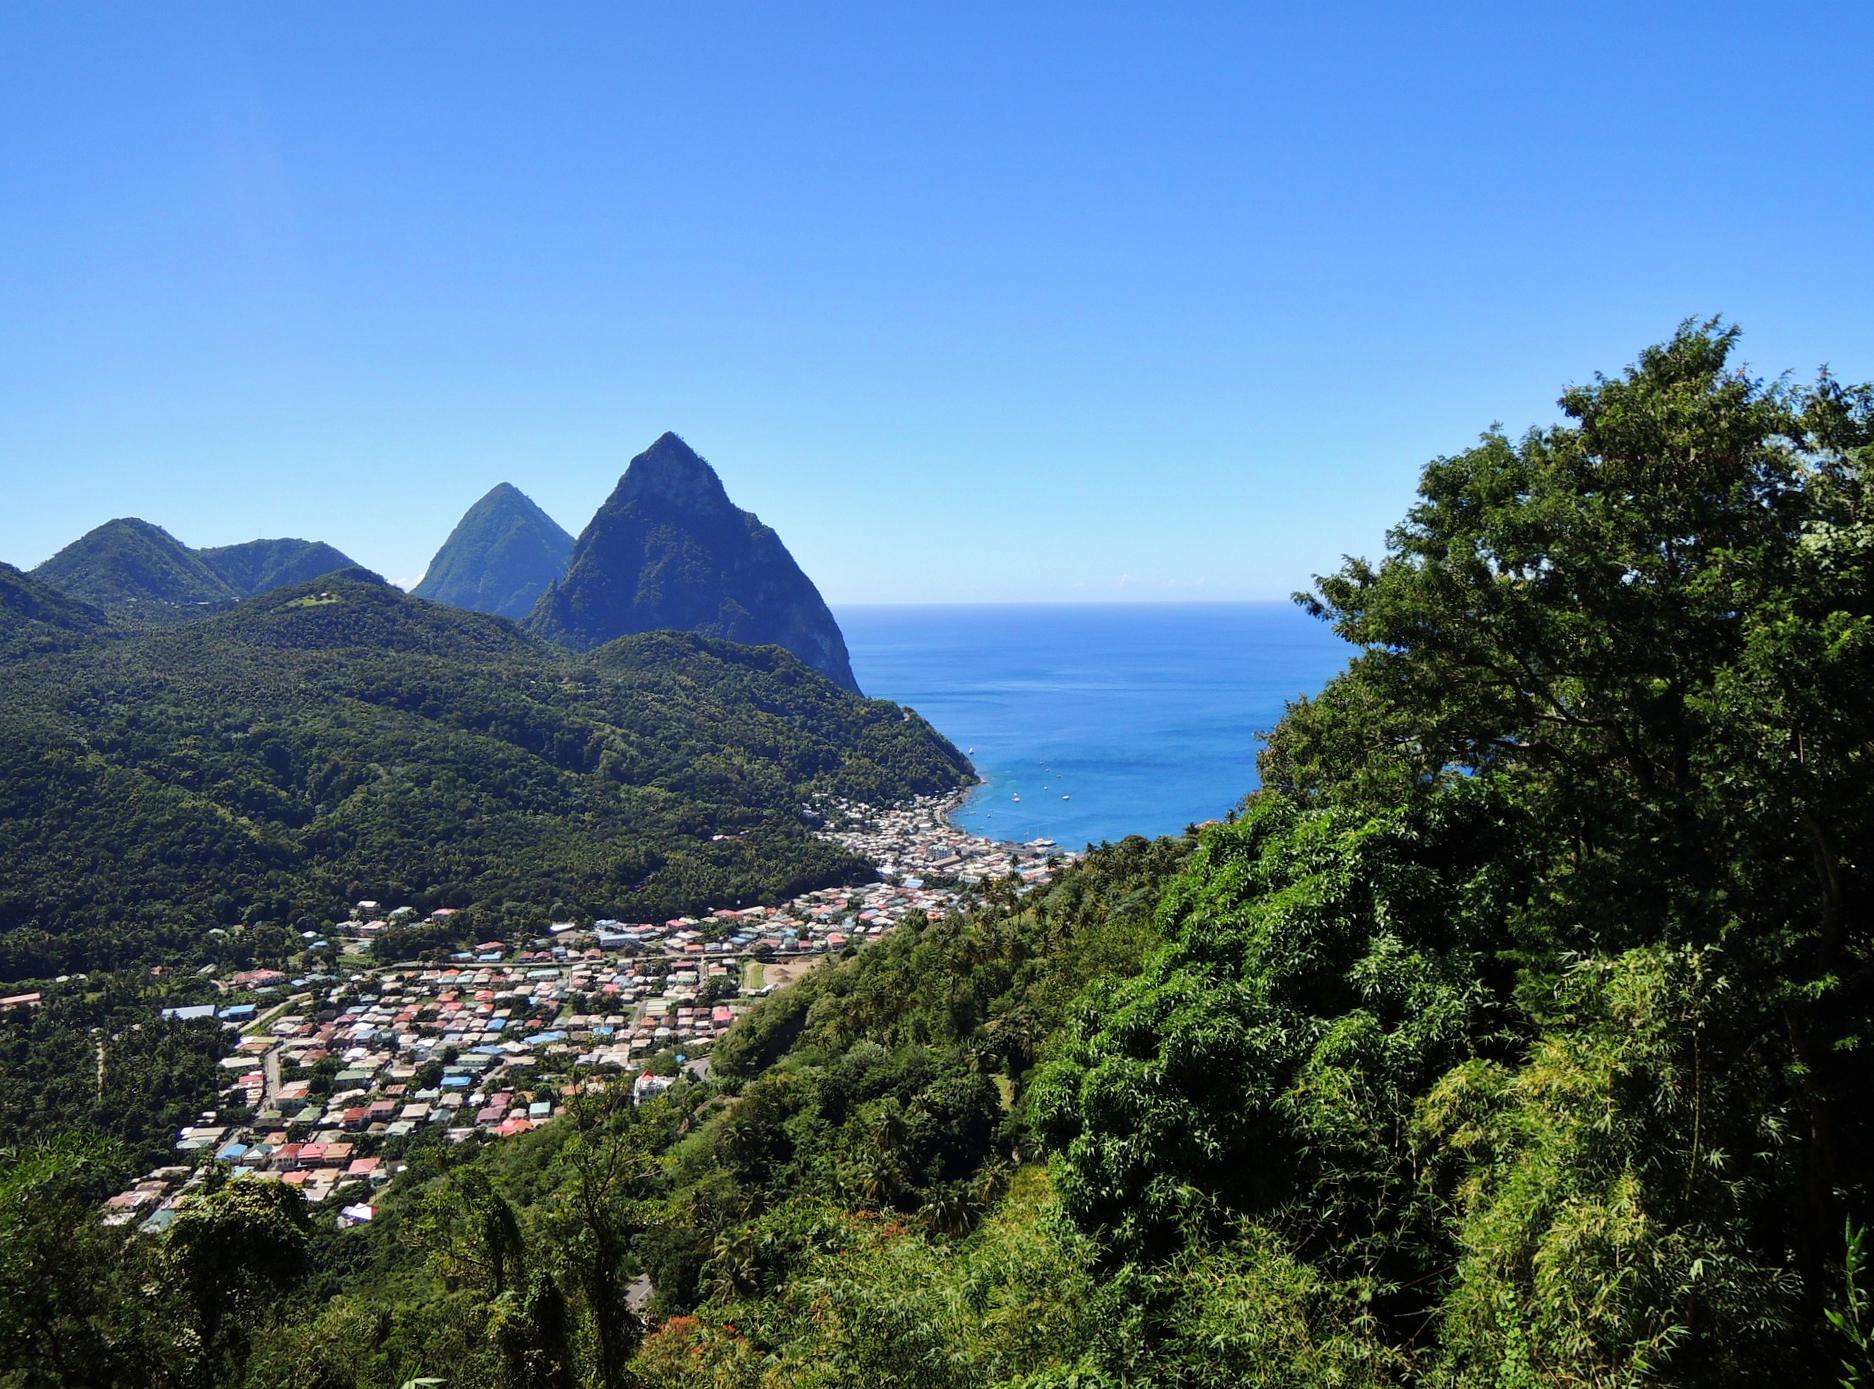 Pitons of St. Lucia